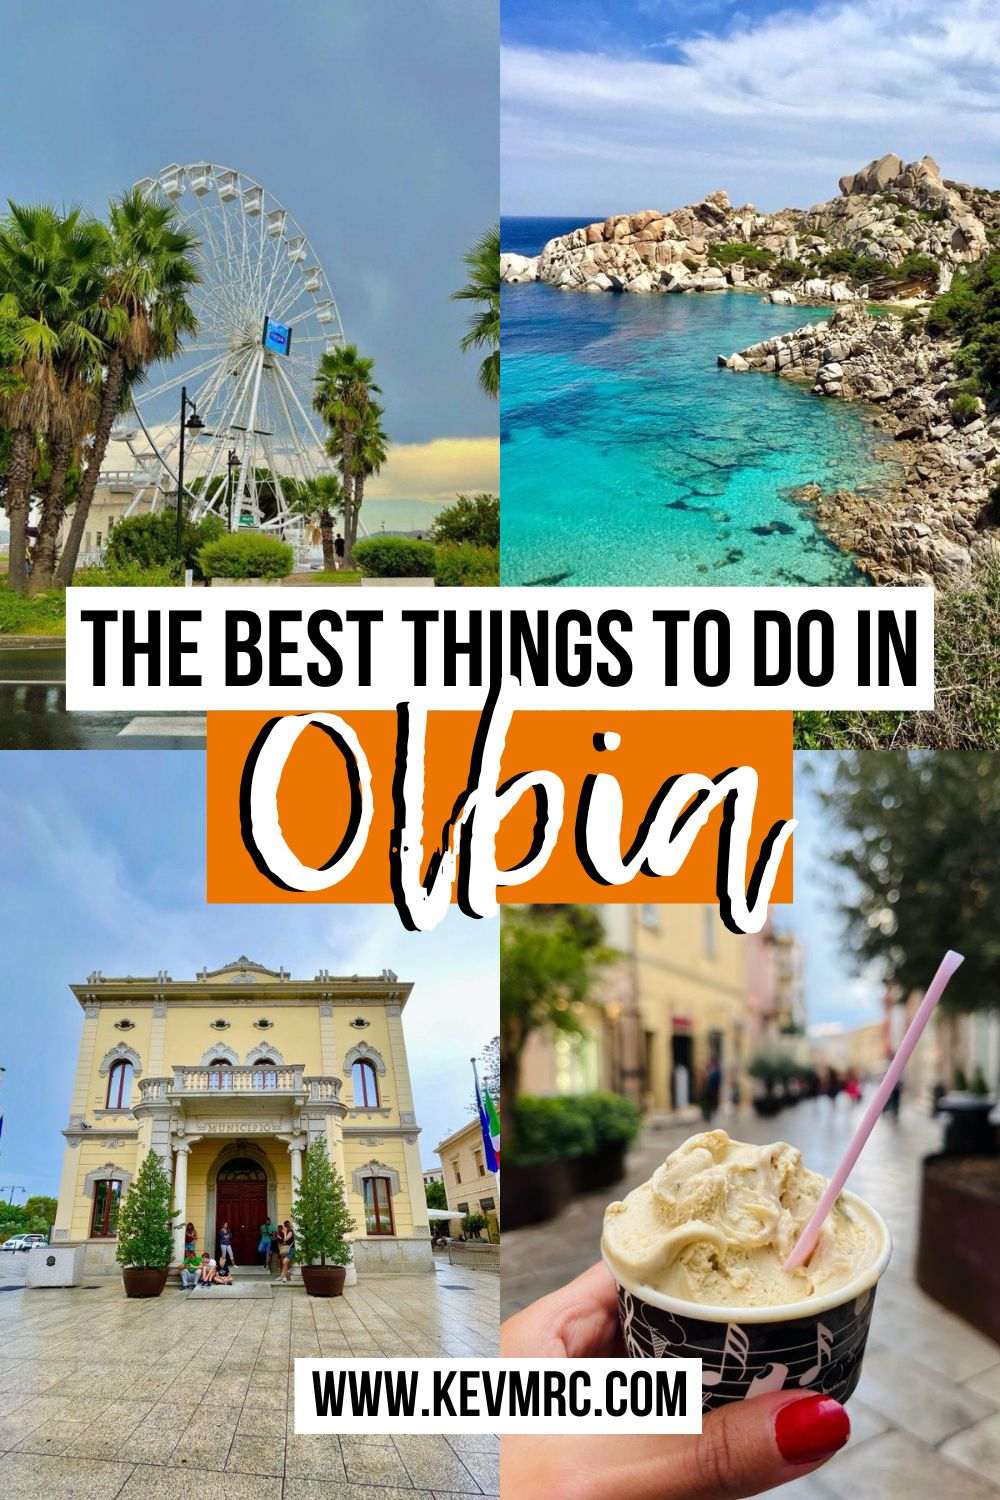 In this full Sardinia travel guide, discover the very best things to do in Olbia Sardinia, as well as an FAQ to answer your questions. olbia sardinia city | olbia Italy | olbia sardinia tipps #olbia #sardinia